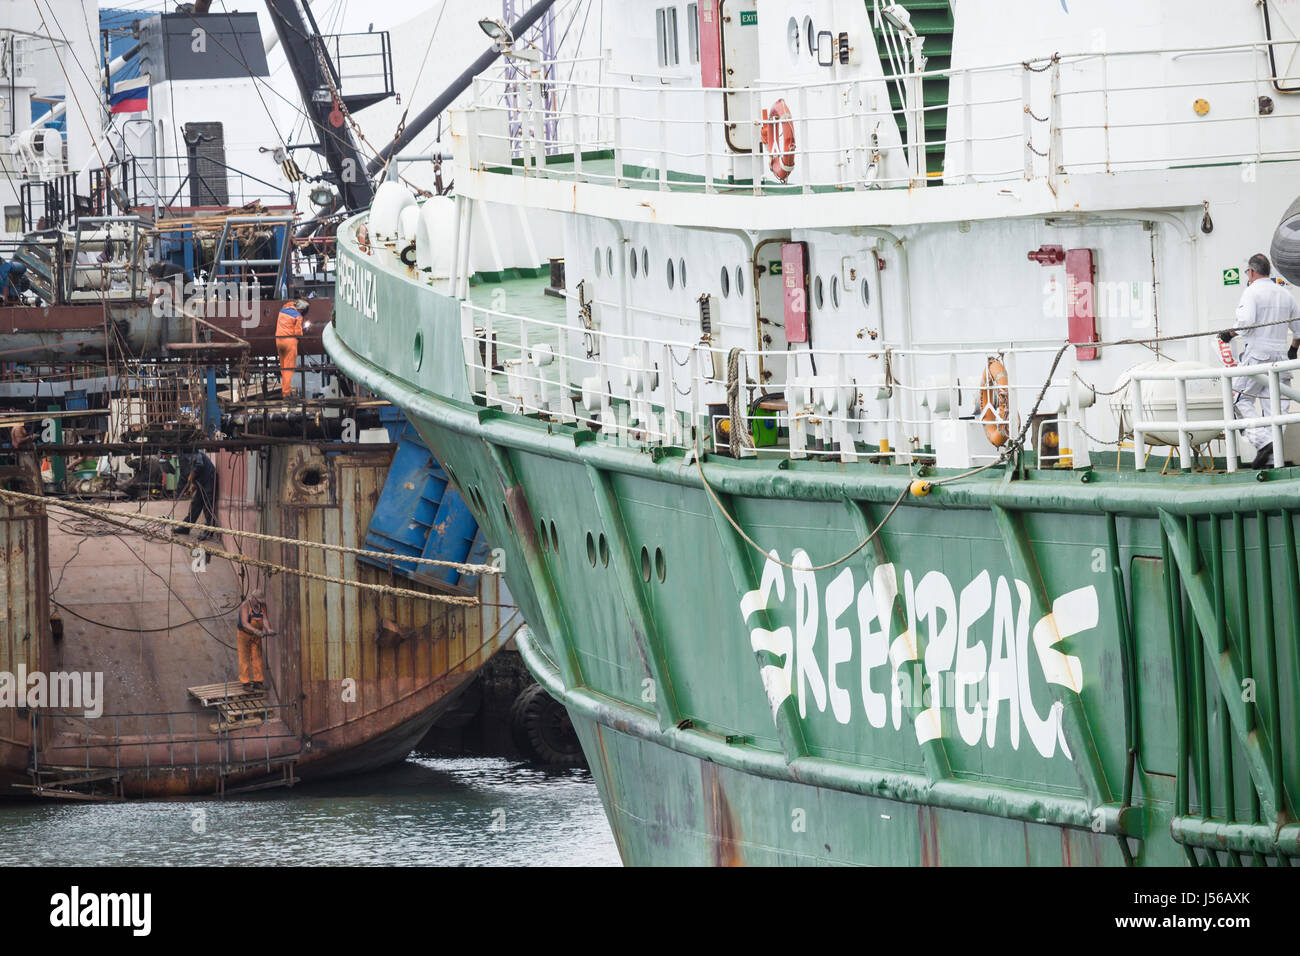 Las Palmas, Gran Canaria, Canary Islands, Spain. 17th May 2017. Greenpeace ship, Esperanza (hope) docks in Las Palmas for maintenance work. For the past two months the ship has been patrolling the West African coast investigating overfishing of the area by industrial fishing vessels. PICTURED: The ship is behind a rusting Russian trawler (workmen can be seen welding on the trawler) and alongside a new, multi million pound aquarium which is due to open later this year ( aquarium and cranes can be seen in background). Credit: ALAN DAWSON/Alamy Live News Stock Photo